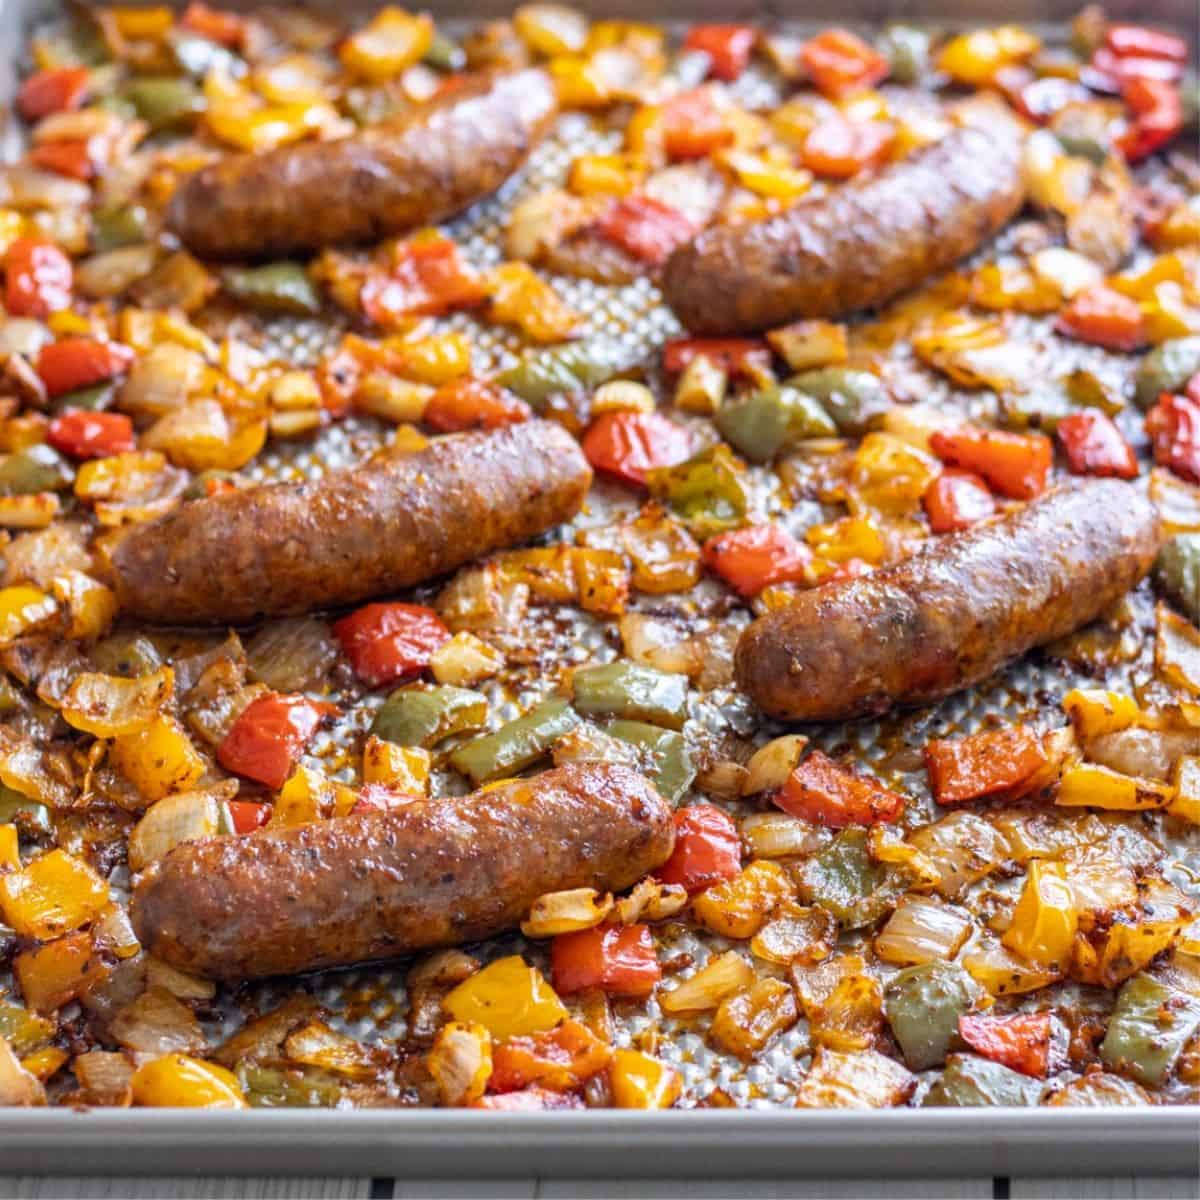 Baked Italian Sausage with Peppers and Onion